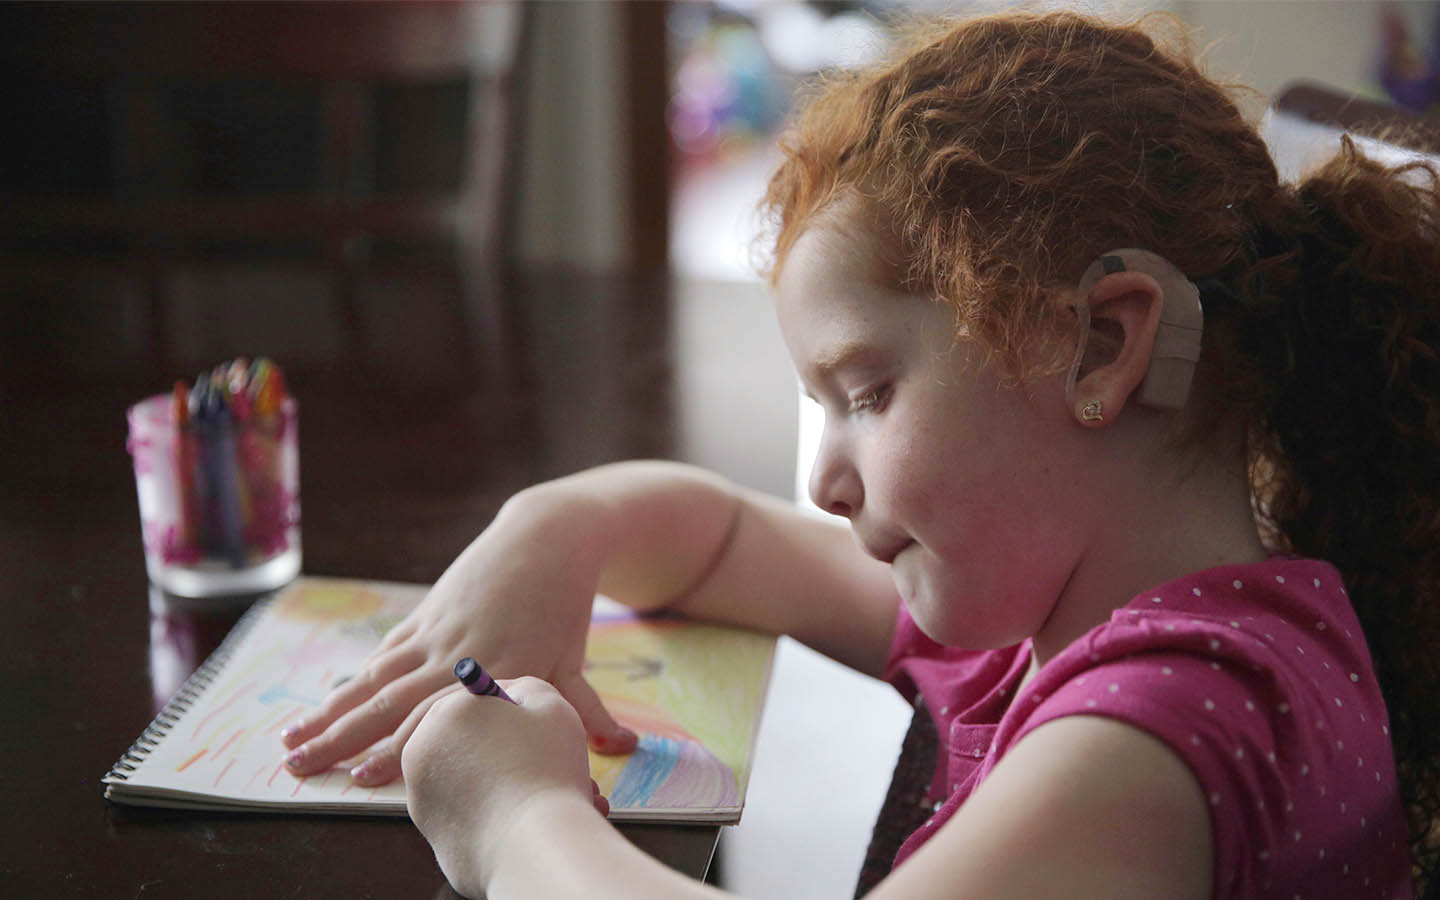 A young girl with a Cochlear implant draws with crayons